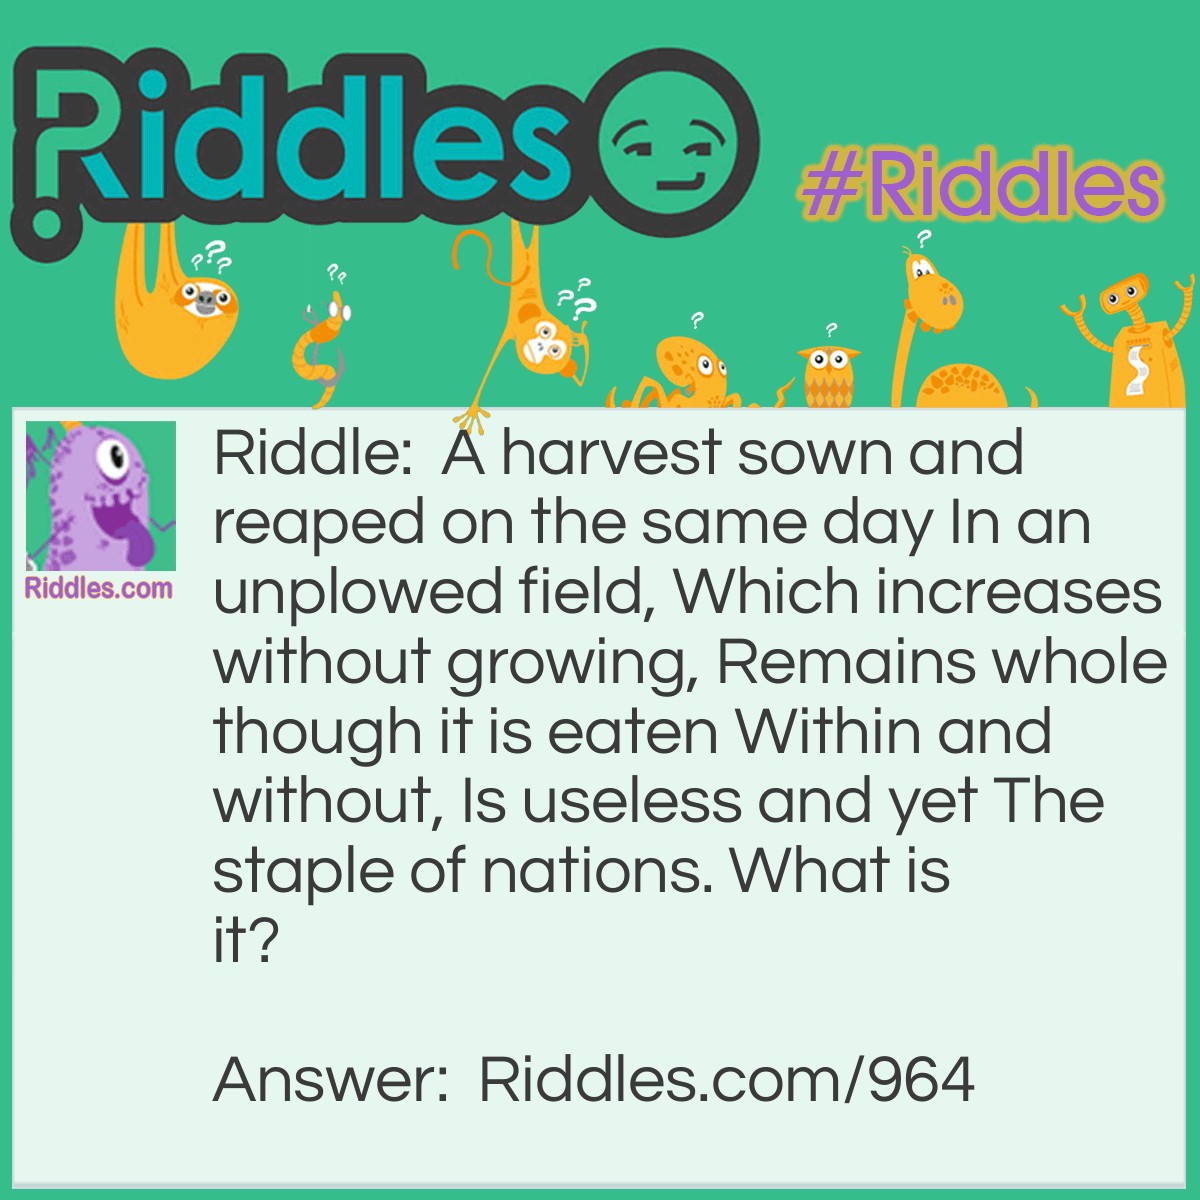 Riddle: A harvest sown and reaped on the same day In an unplowed field, Which increases without growing, Remains whole though it is eaten Within and without, Is useless and yet The staple of nations. 
What is it? Answer: War.